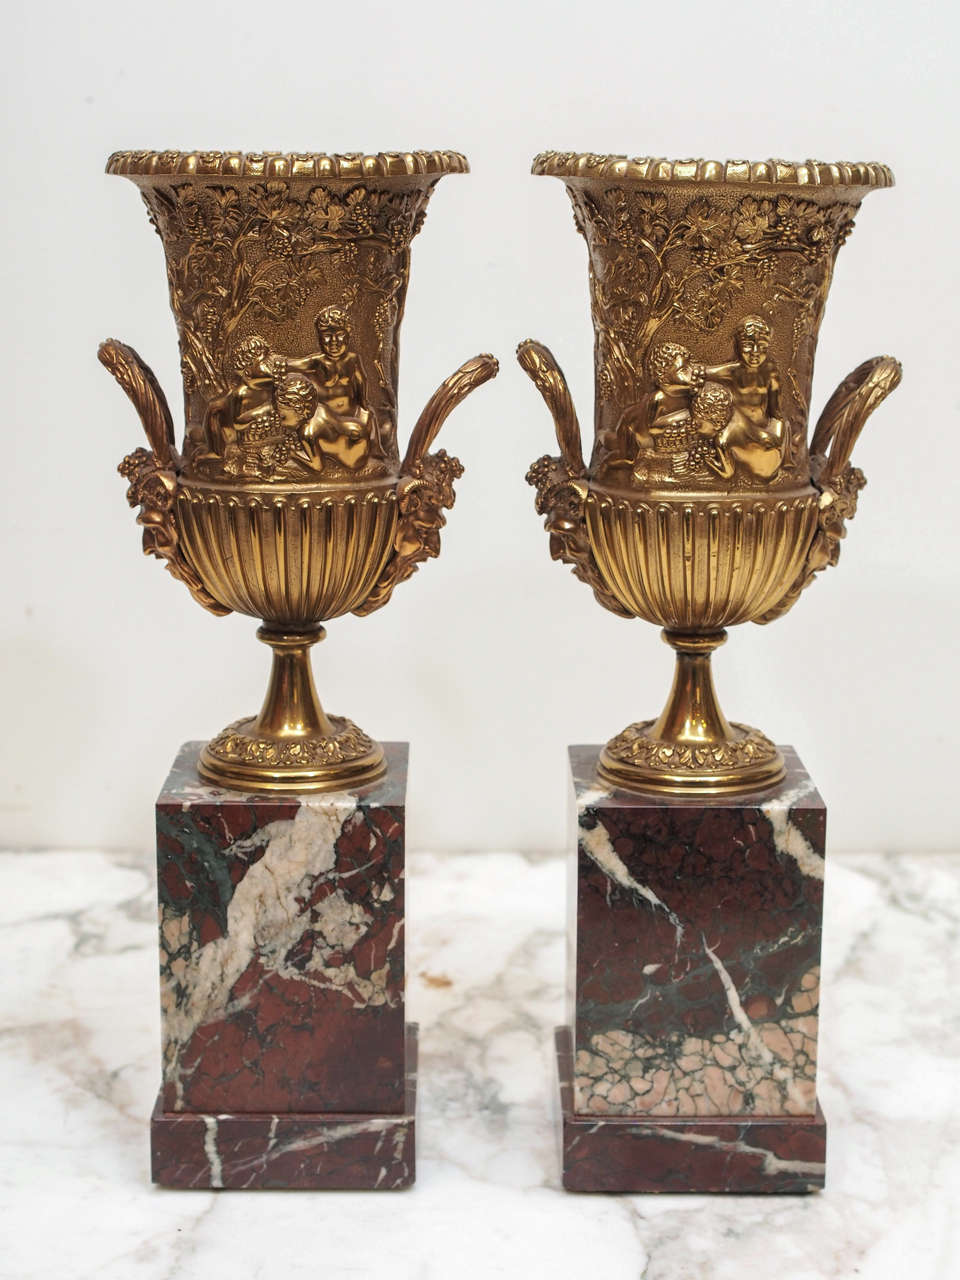 Pair of Cast Classical Handled Urns on rouge marble plinths in the manner of the Grand Tour